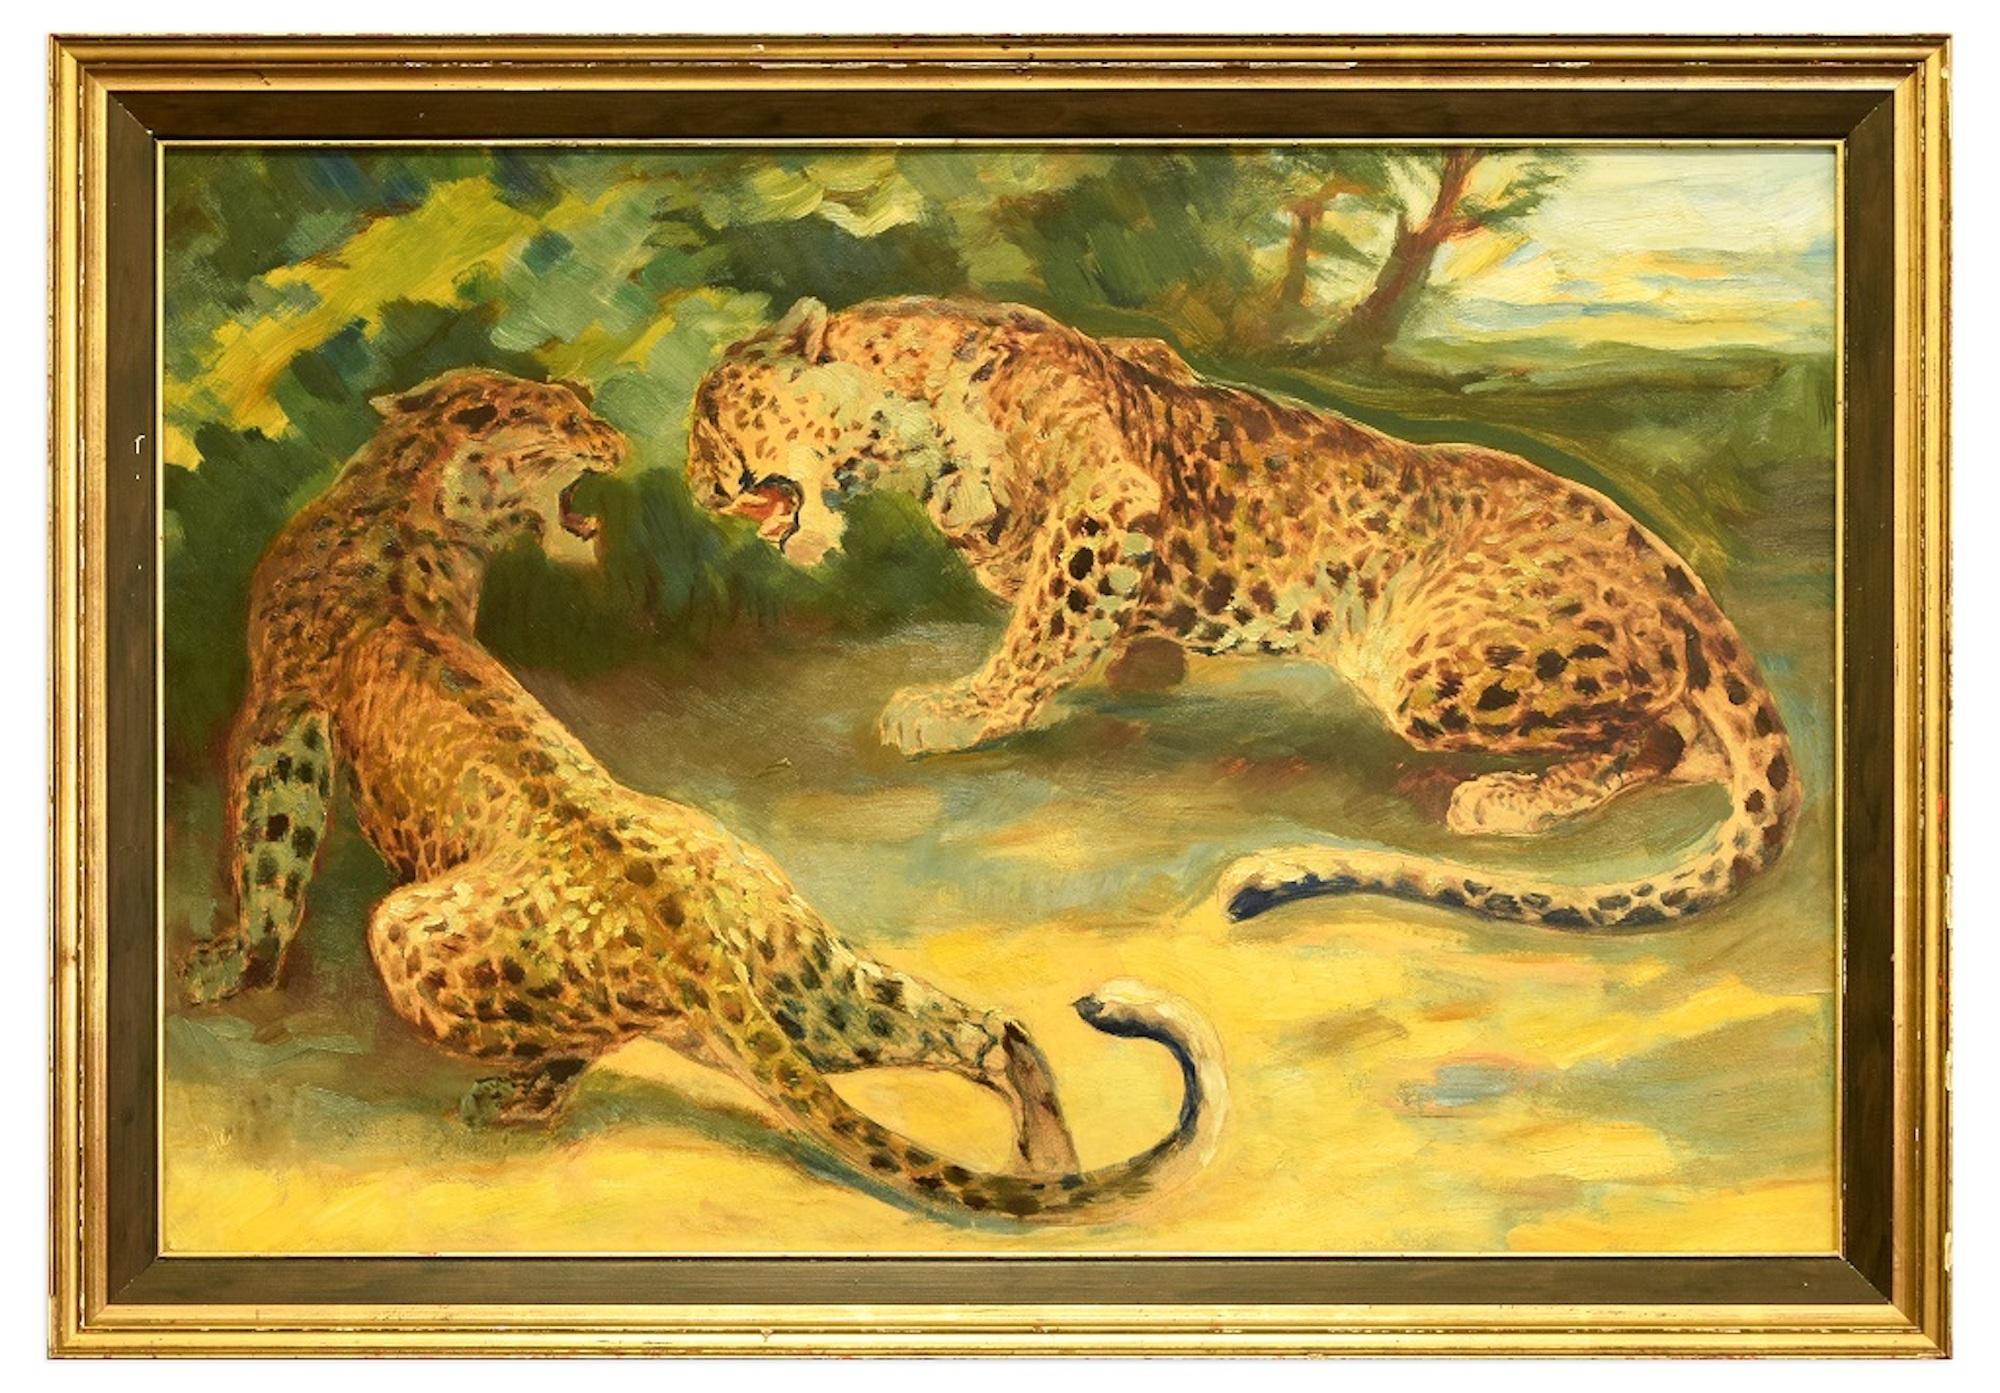 Ferdinand Schebeck Animal Painting - Playing Leopards - Original Oil on Canvas by F. Schebeck - Early 1900